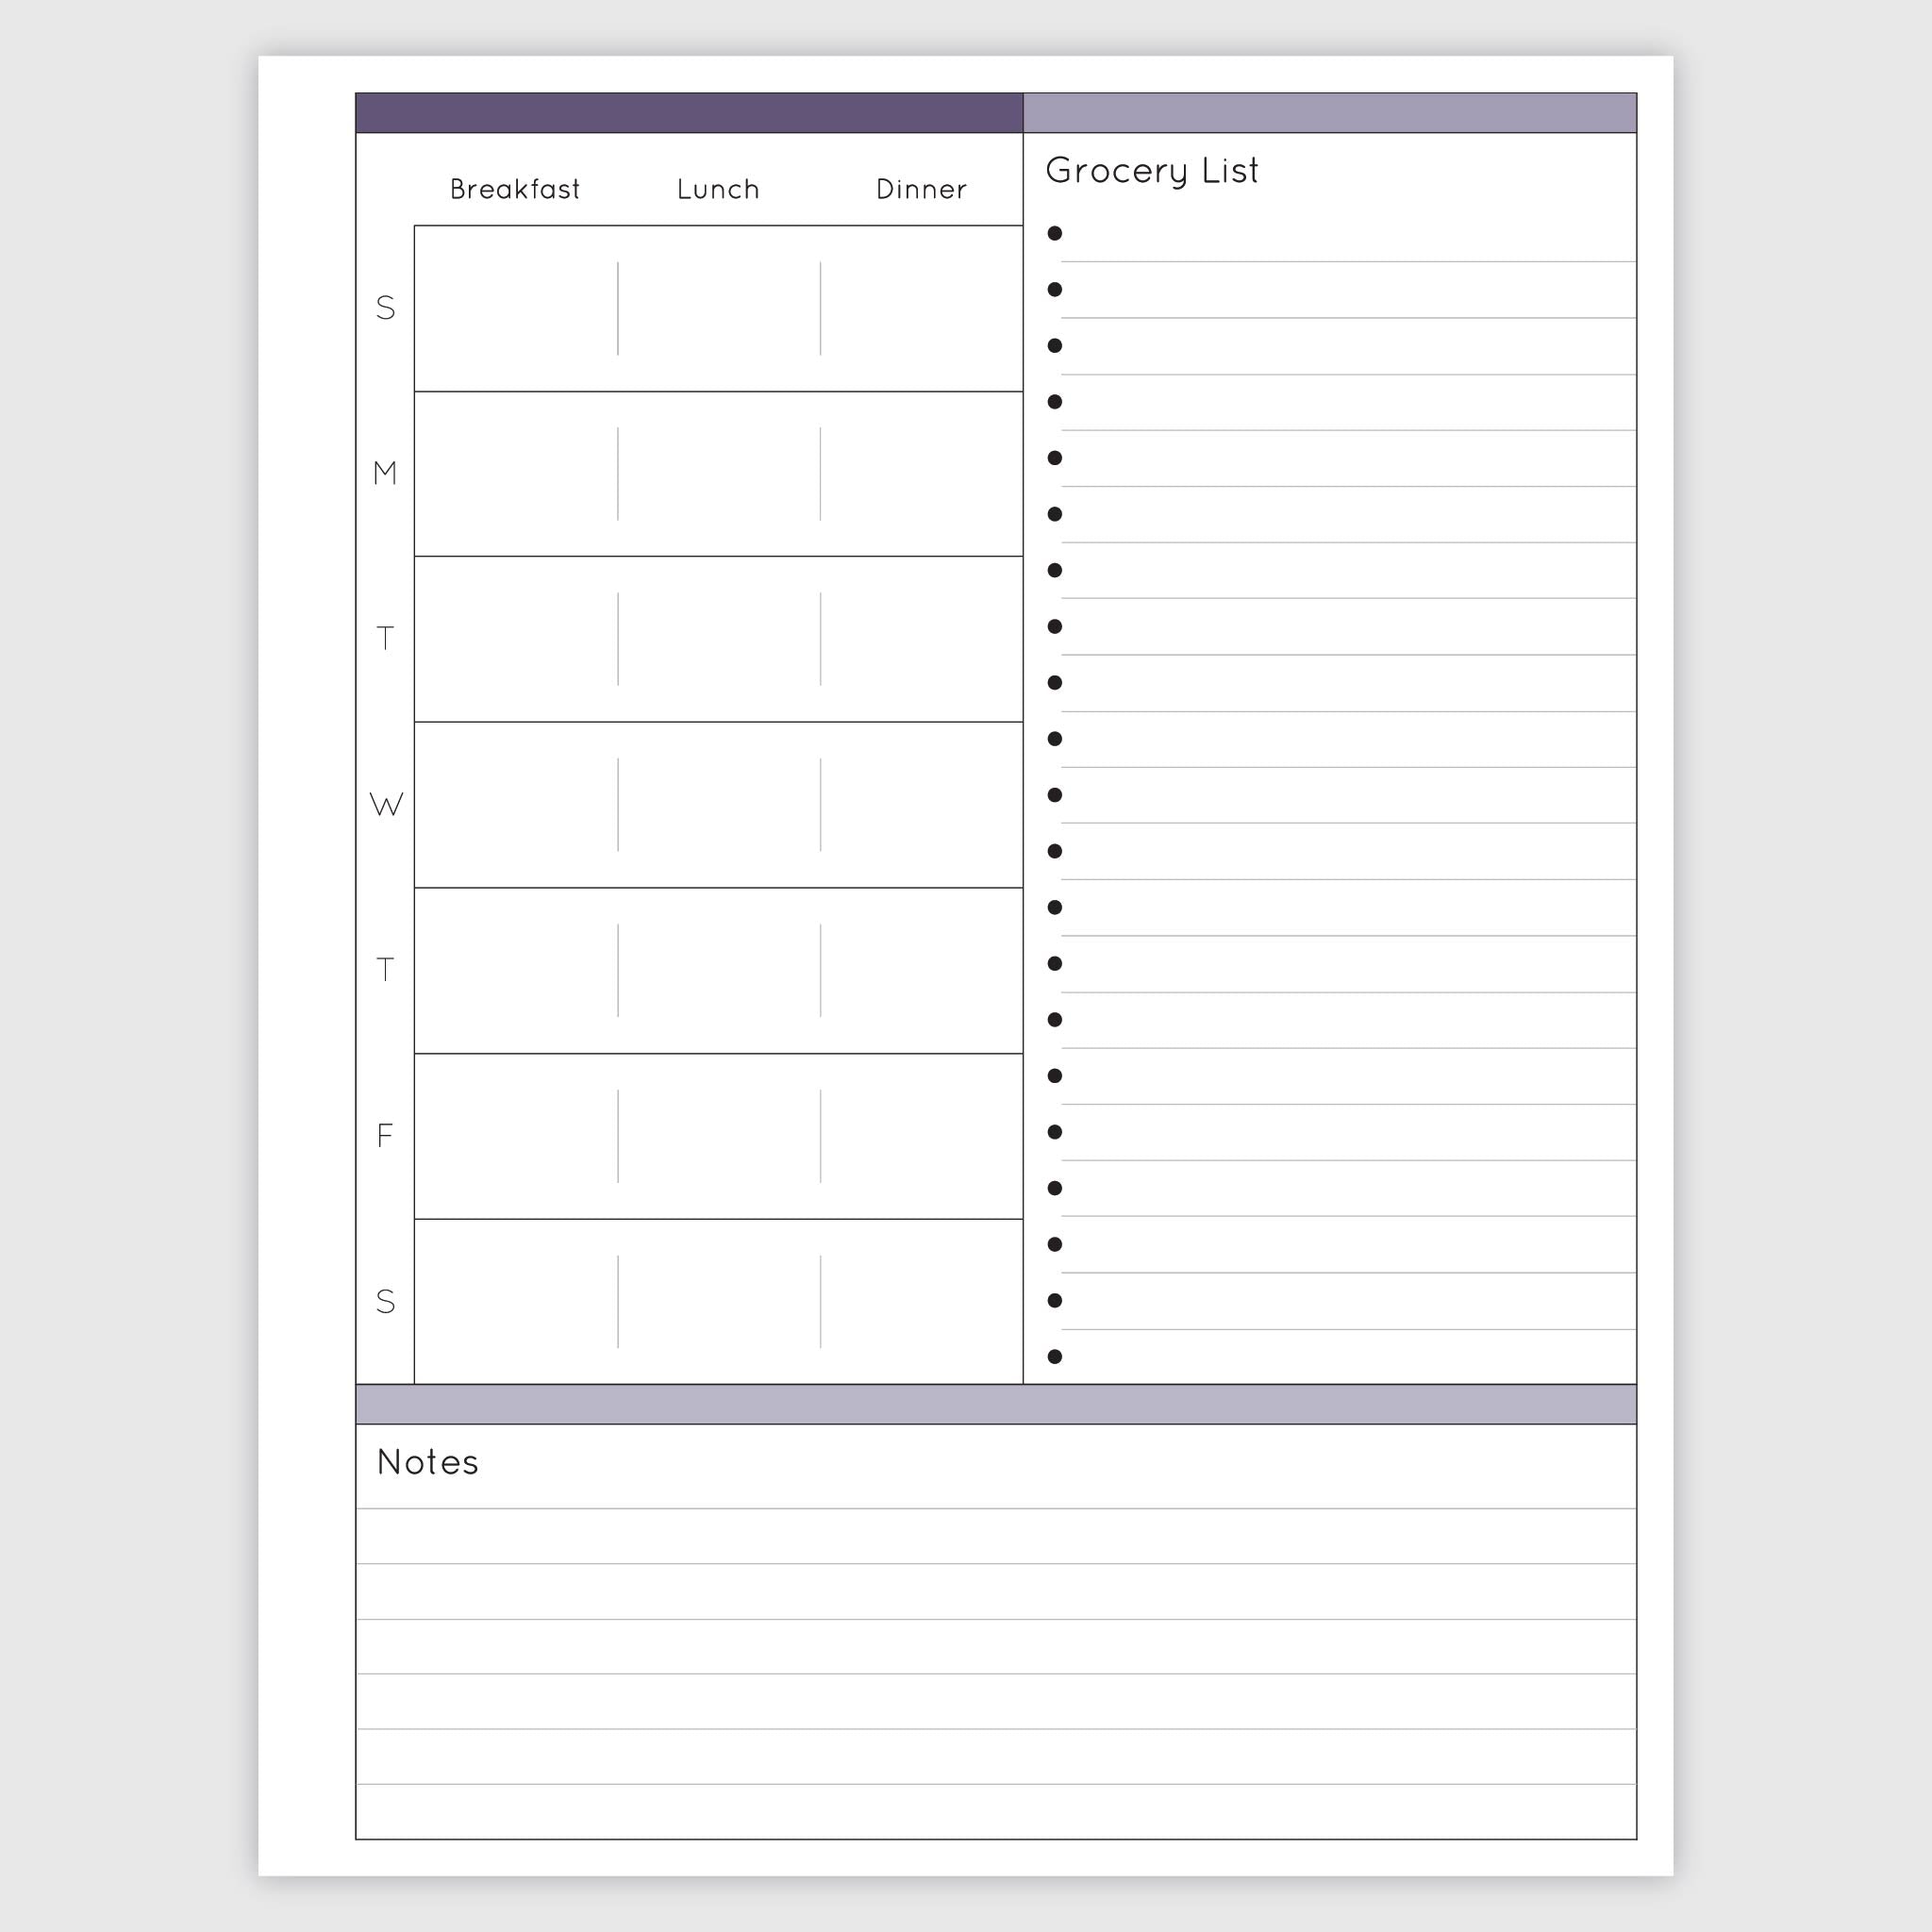 The Works Bliss - Daily Planner Personalized - Colibri Paper Co